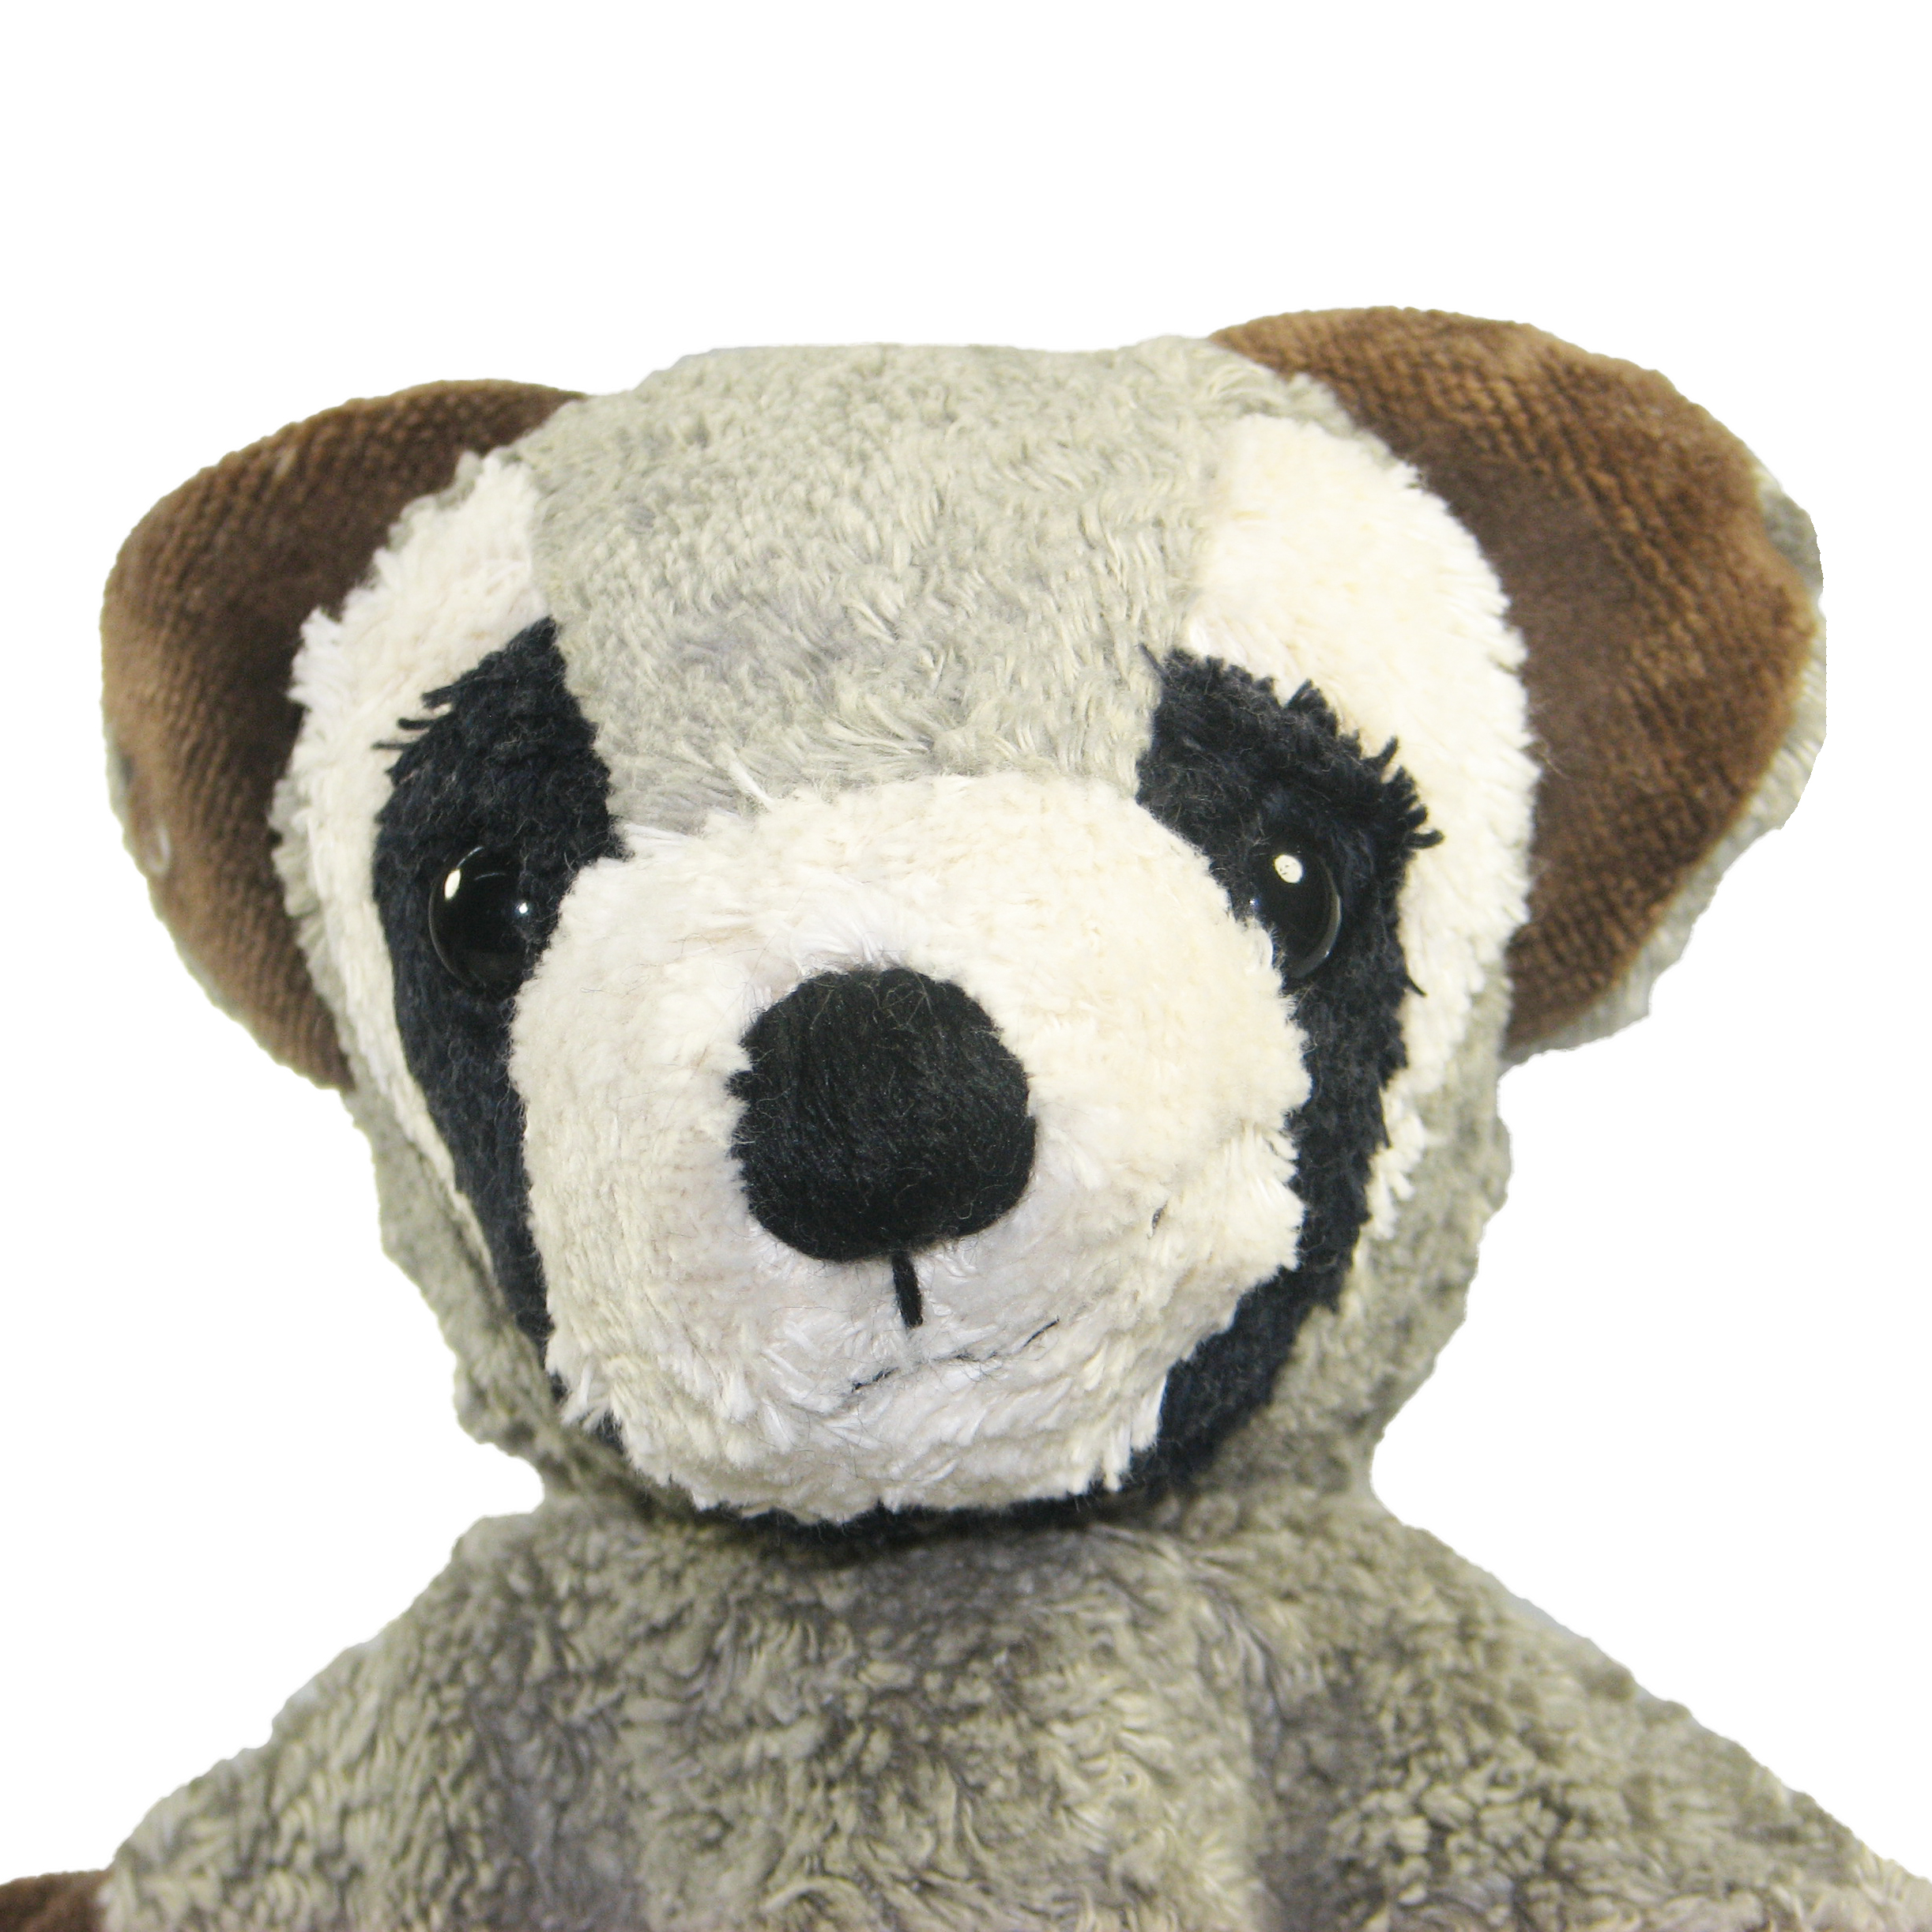 Hand puppet racoon - made of natural material - by Kallisto